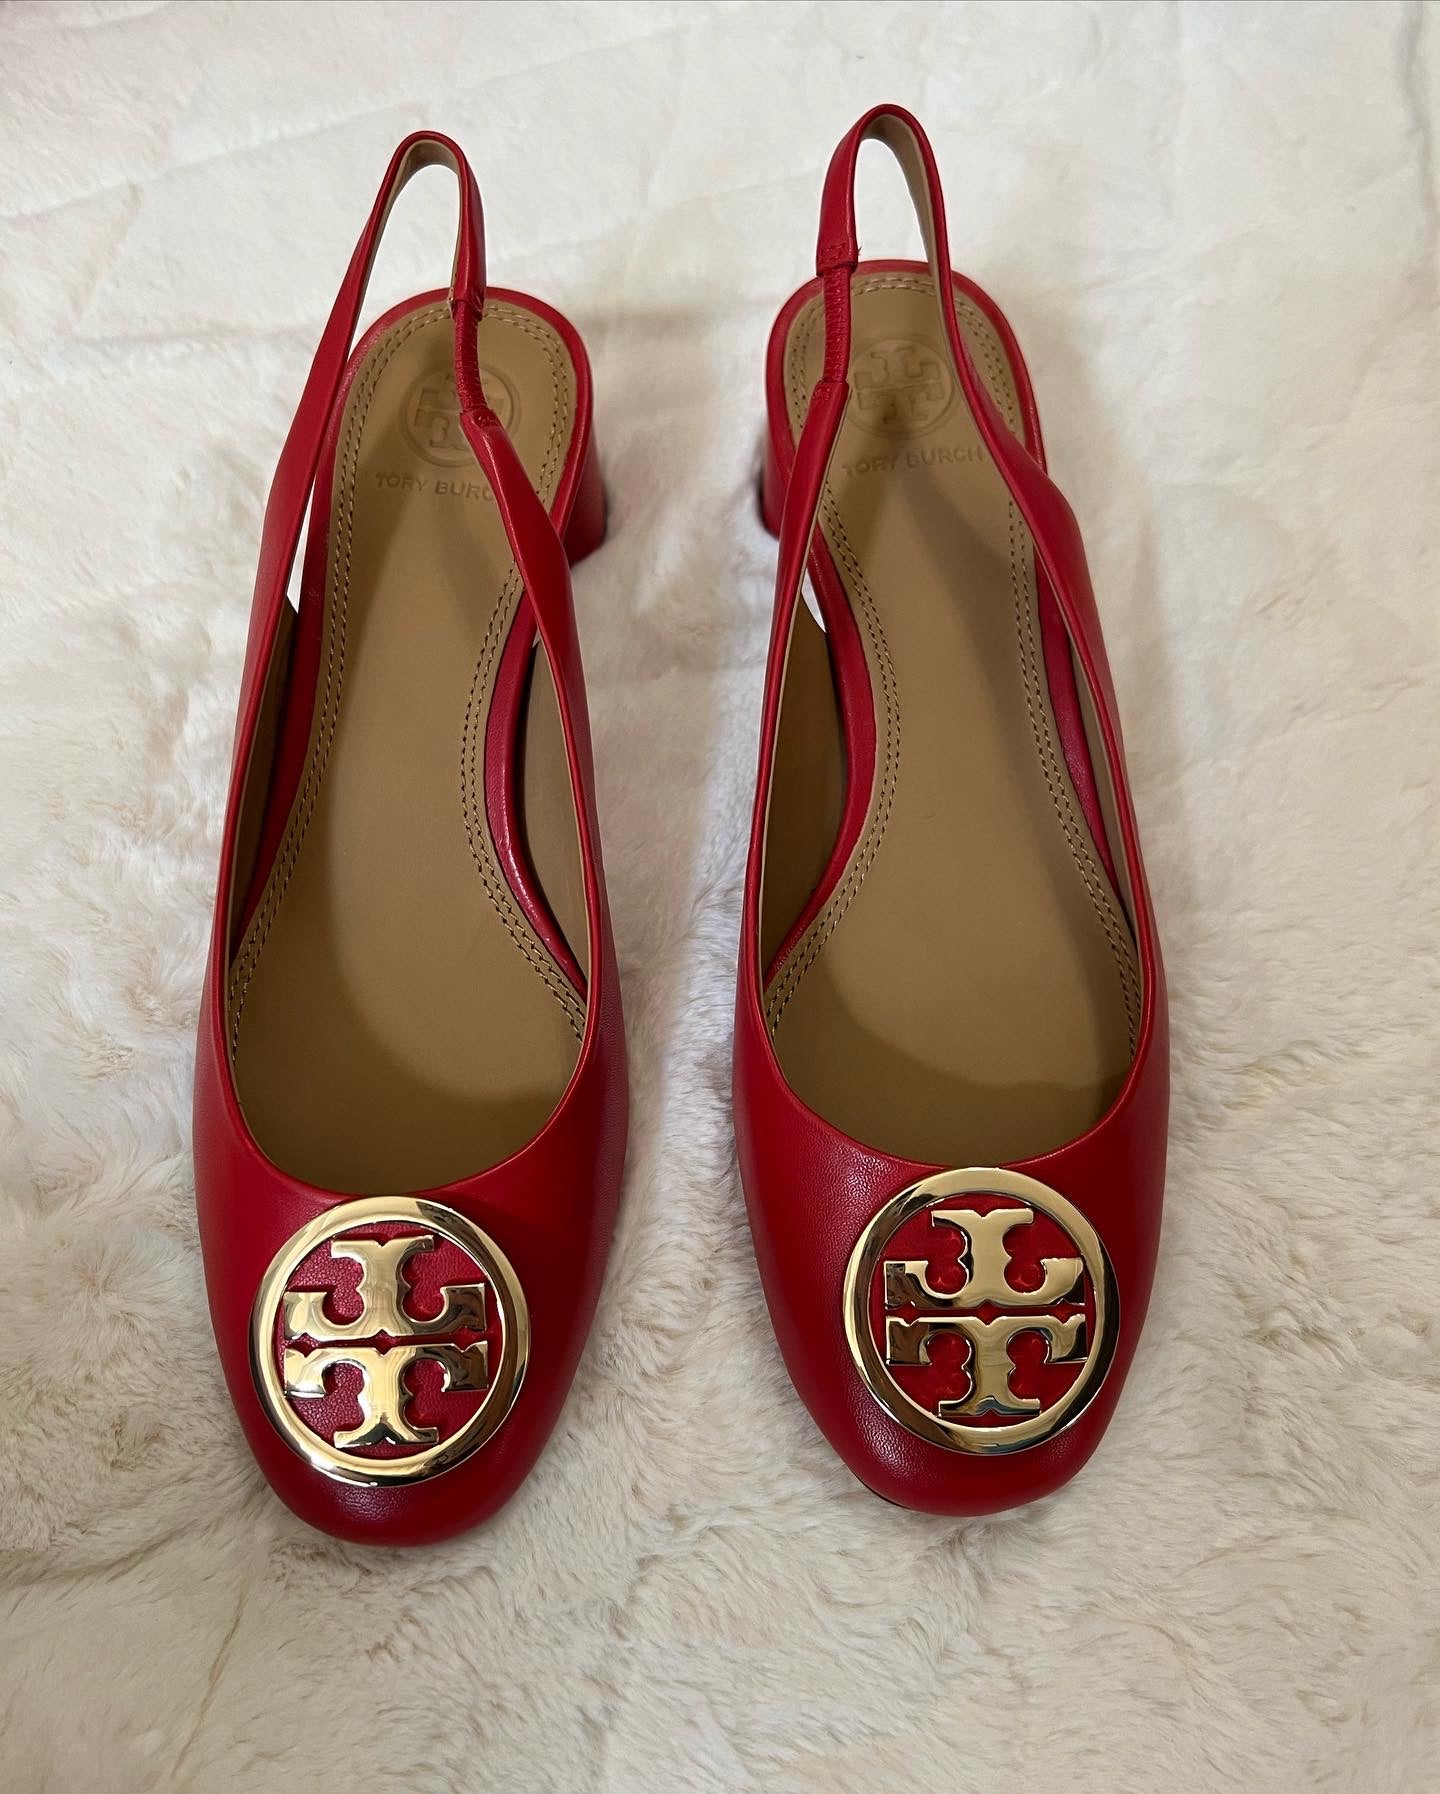 Tory Burch Benton Leather Slingback Pumps, Brilliant Red, Size 6.5M